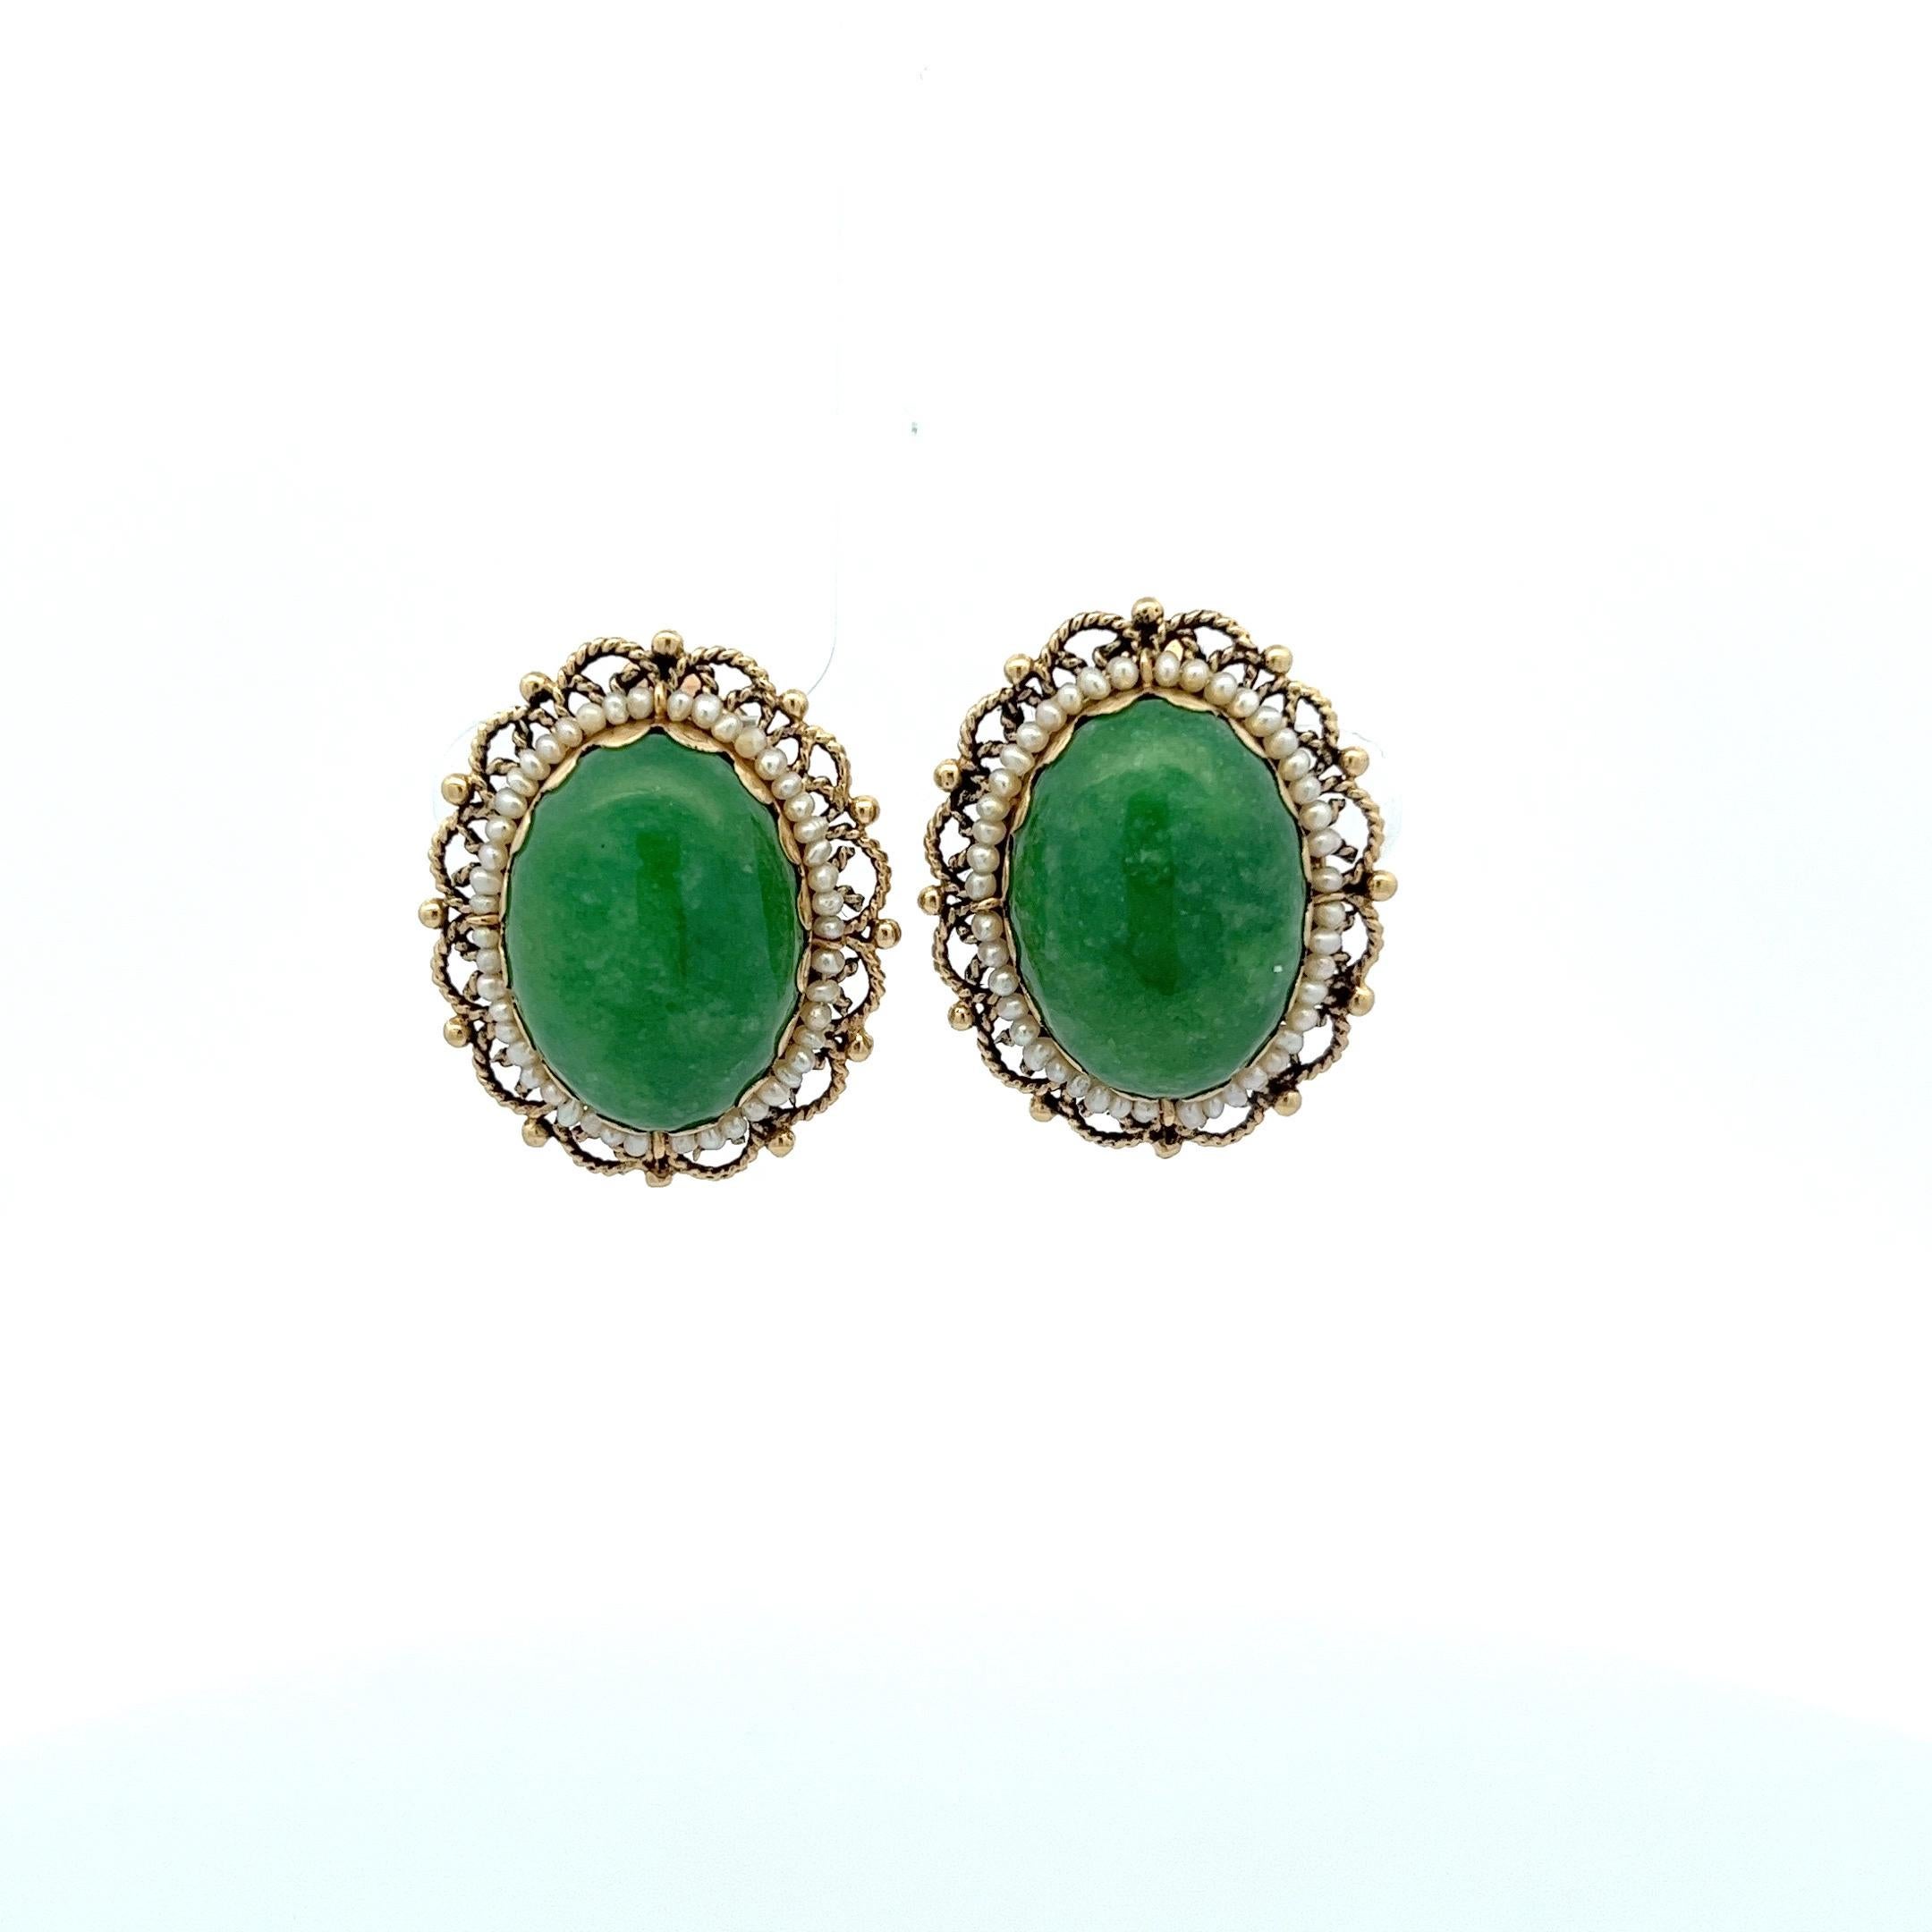 These elegant jade and pearl clip-on earrings are a true statement piece. With a combined weight of 25.7 carats, the stones are gracefully set in 14 karat yellow gold. The jade is framed by a meticulous arrangement of 90 seed pearls, which is